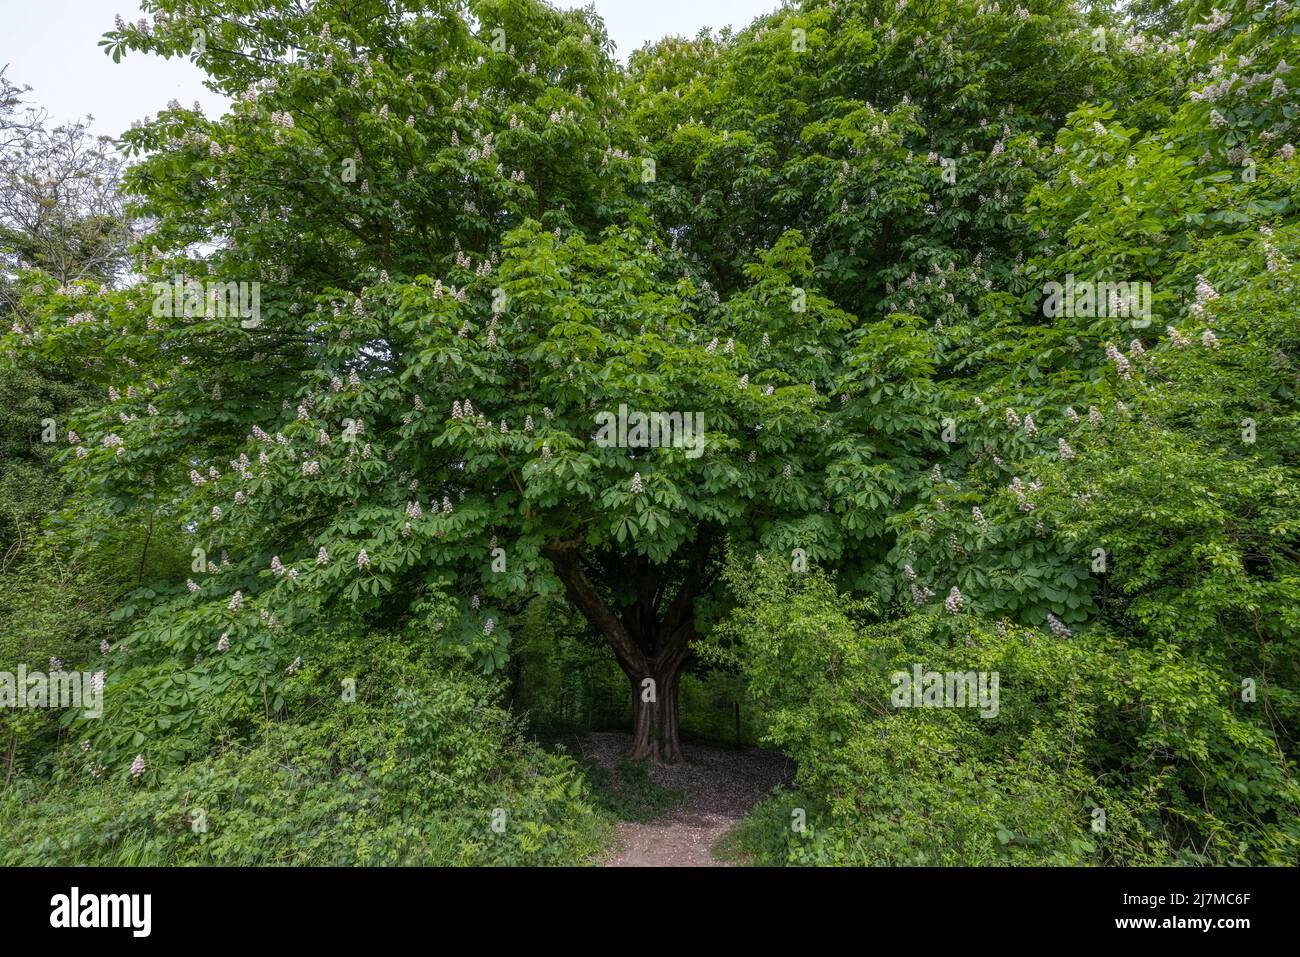 Guardian of the Wood.  An Ancient Horse Chestnut Tree (Aesculus hippocastanum) at the Entrance to a Wood. Stock Photo